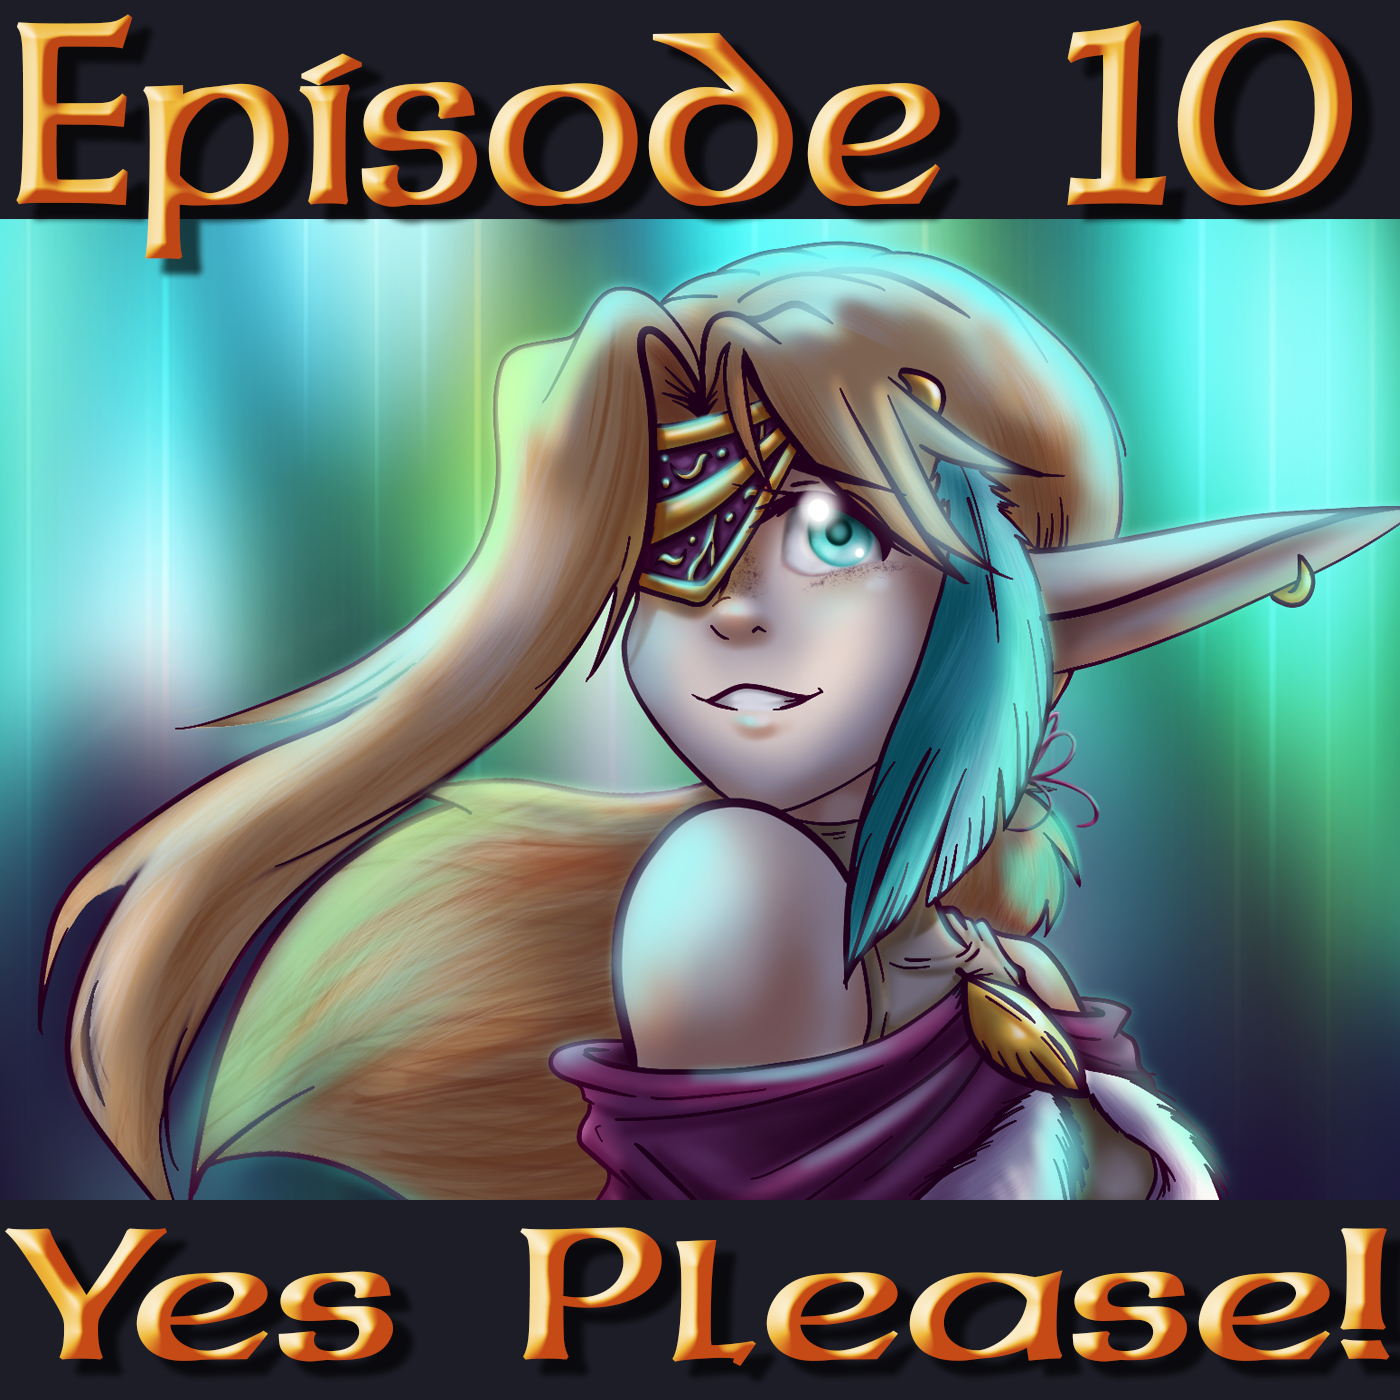 Yes Please! Episode 10: A Binding Promise (Check Please S1 E48.5)